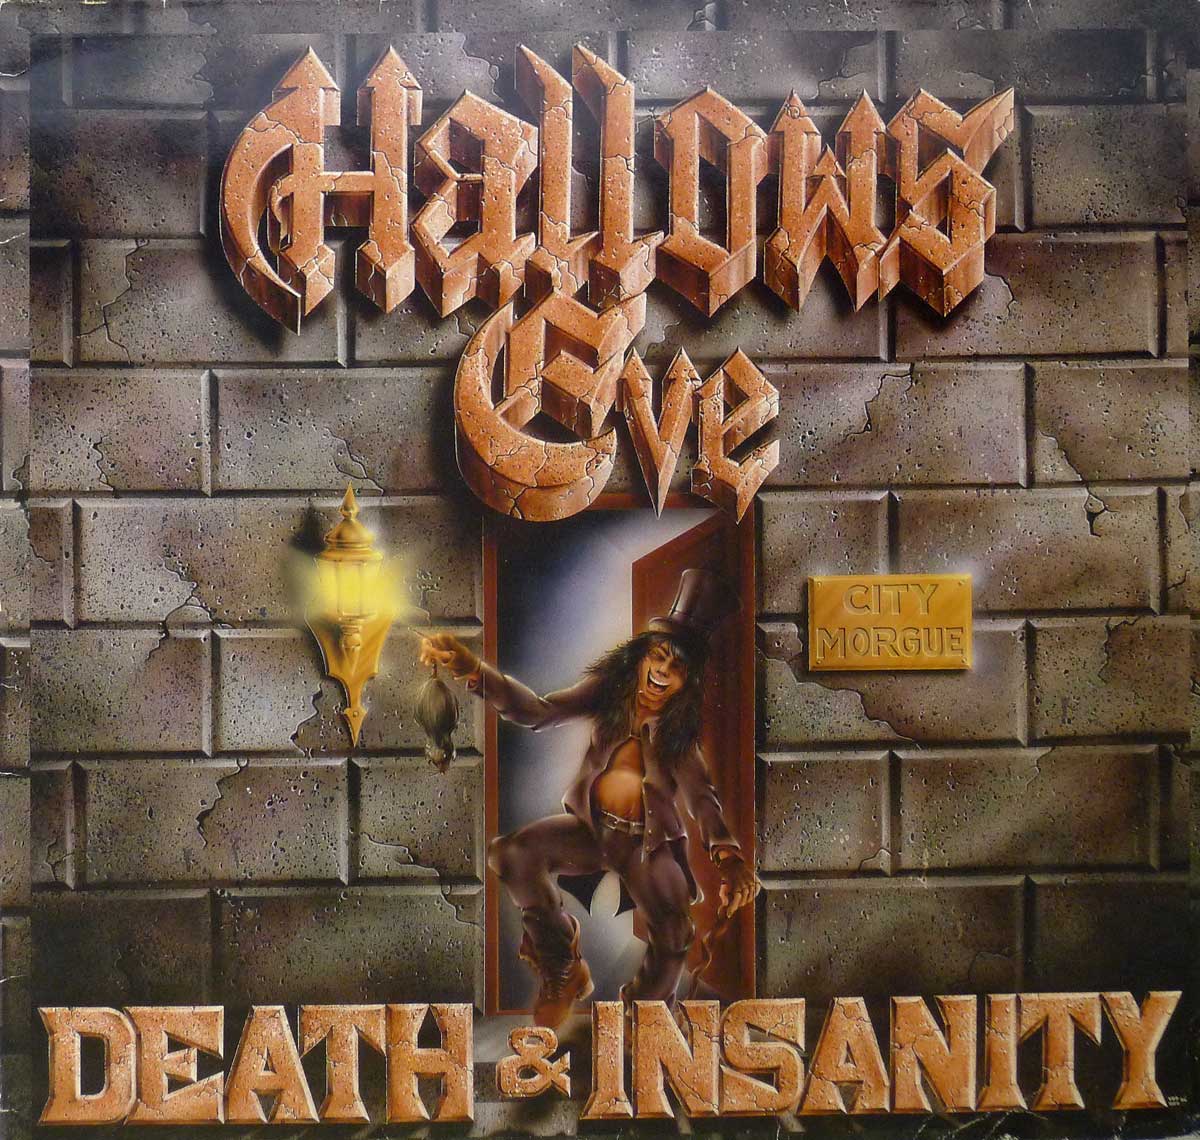 large album front cover photo of: Hallow's Eve Death & Insanity 